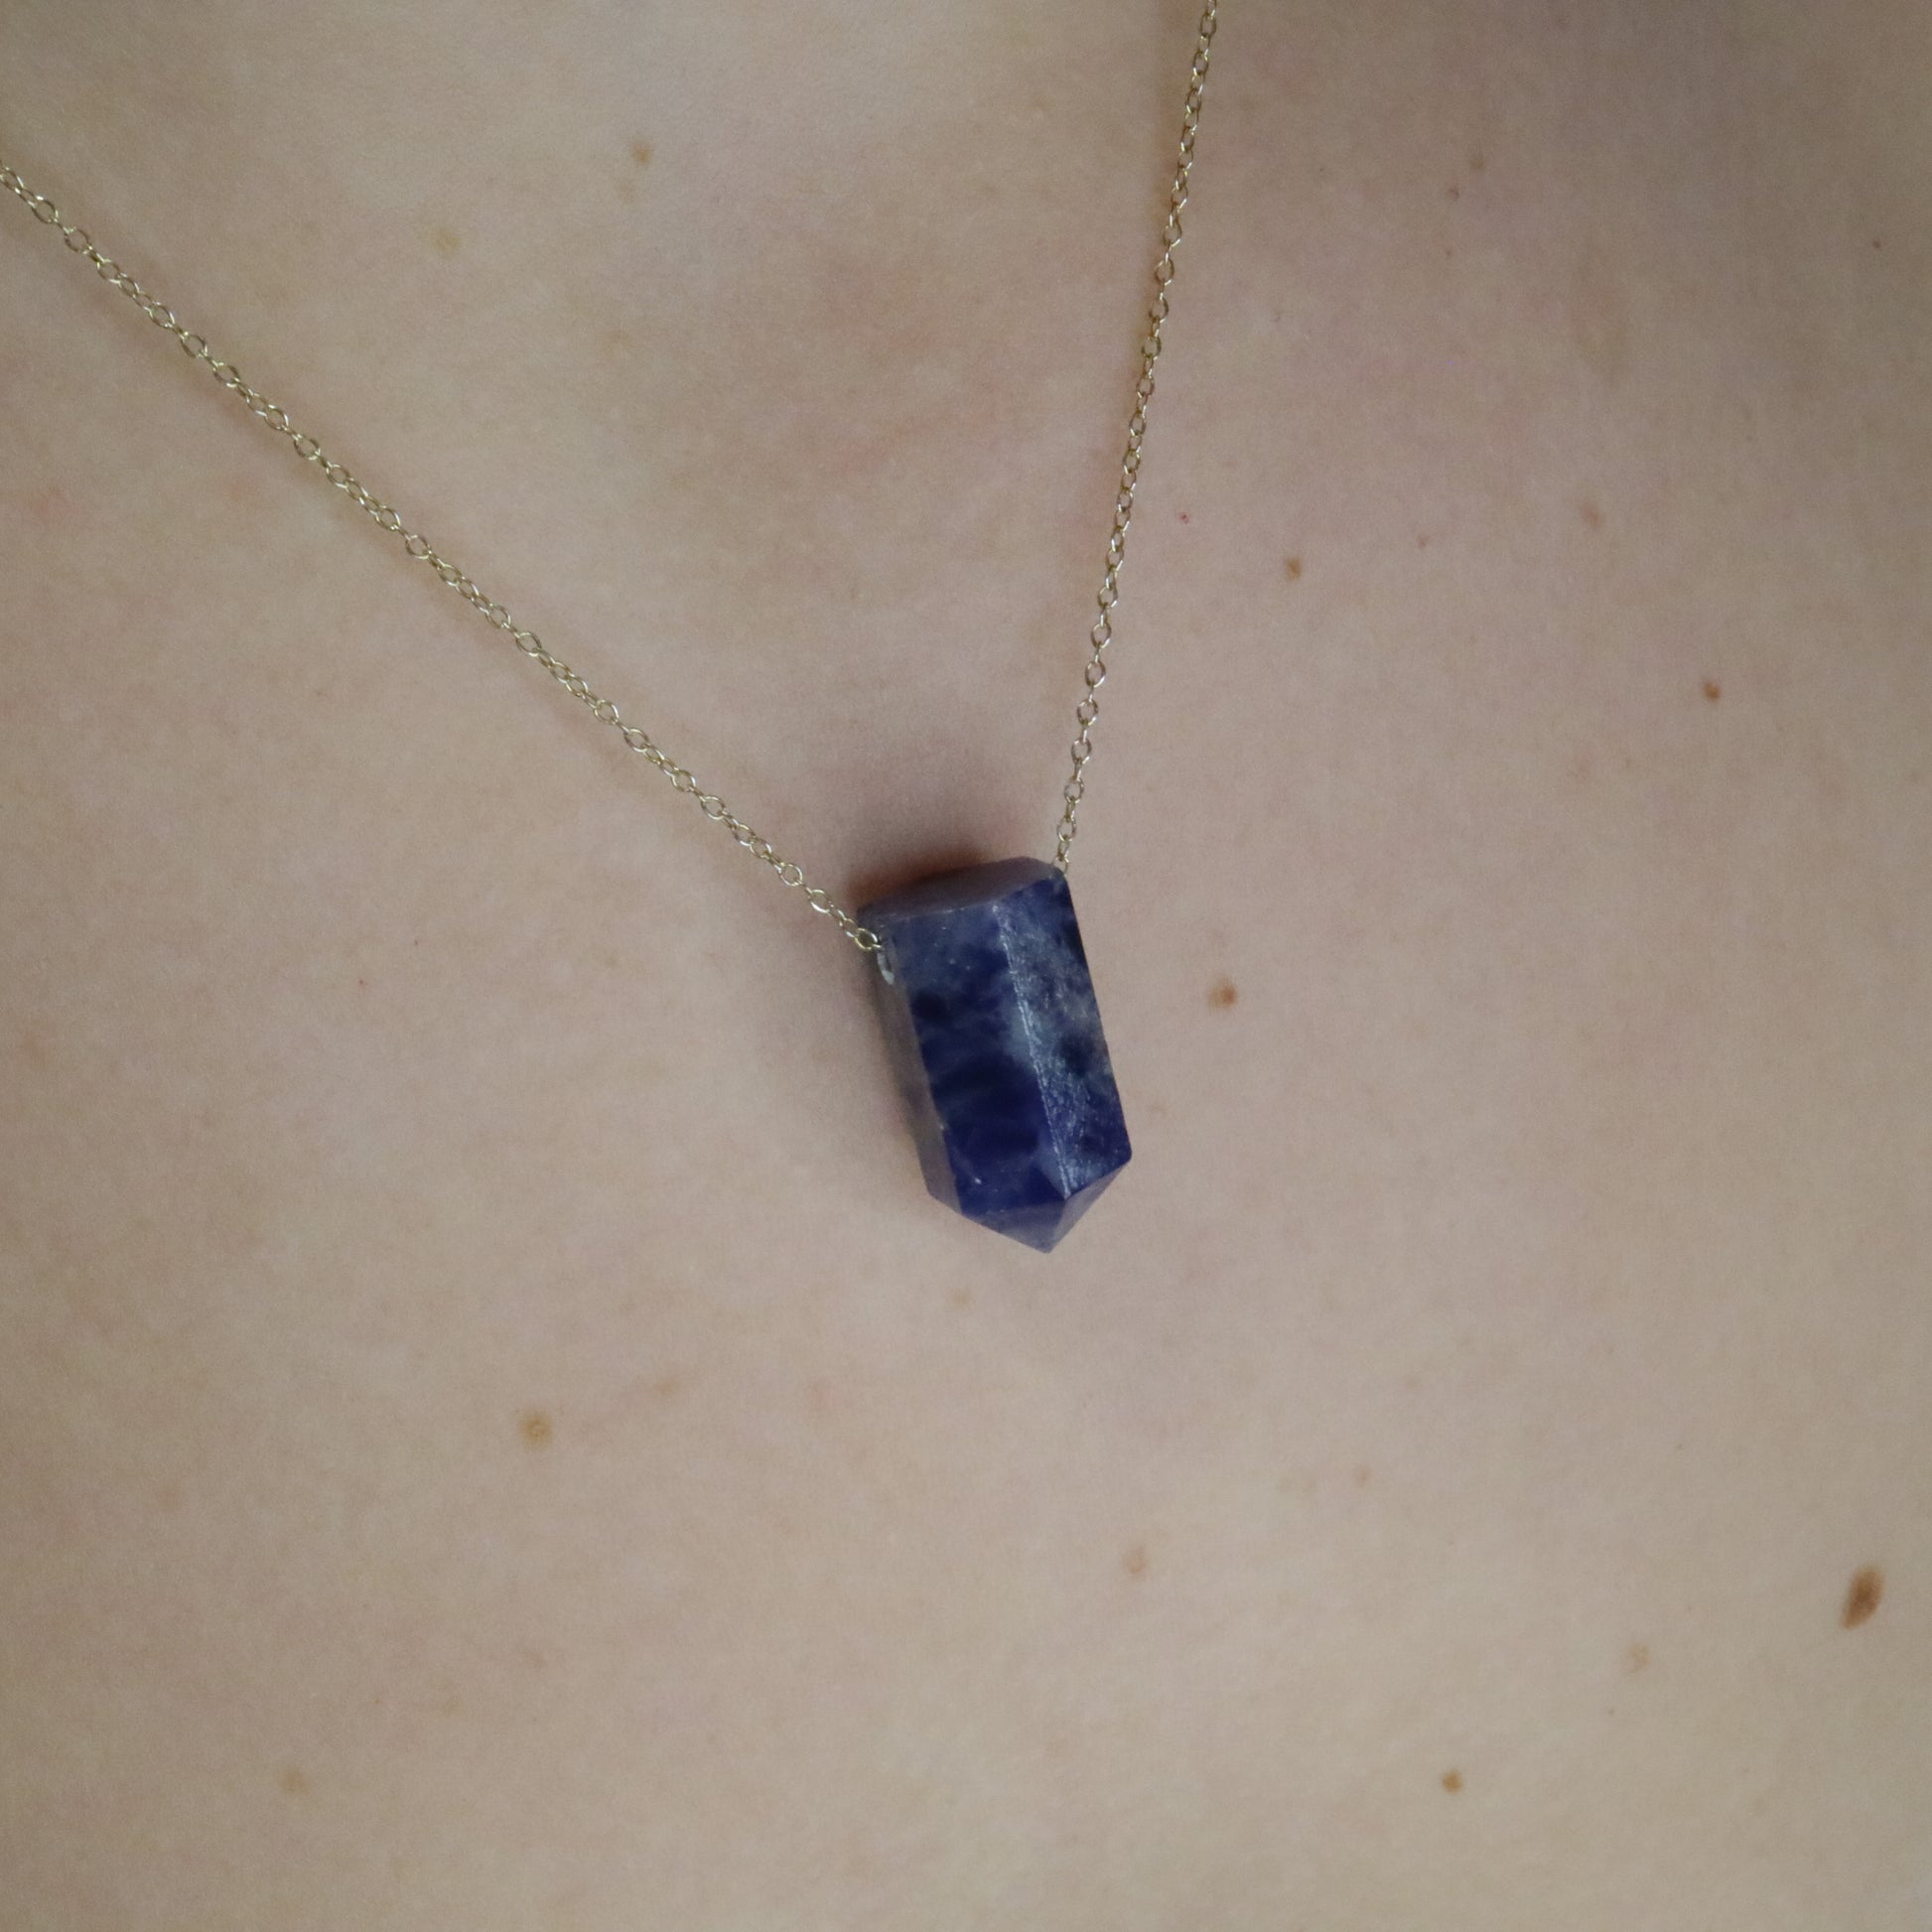 Girl wearing Sodalite crystal necklace